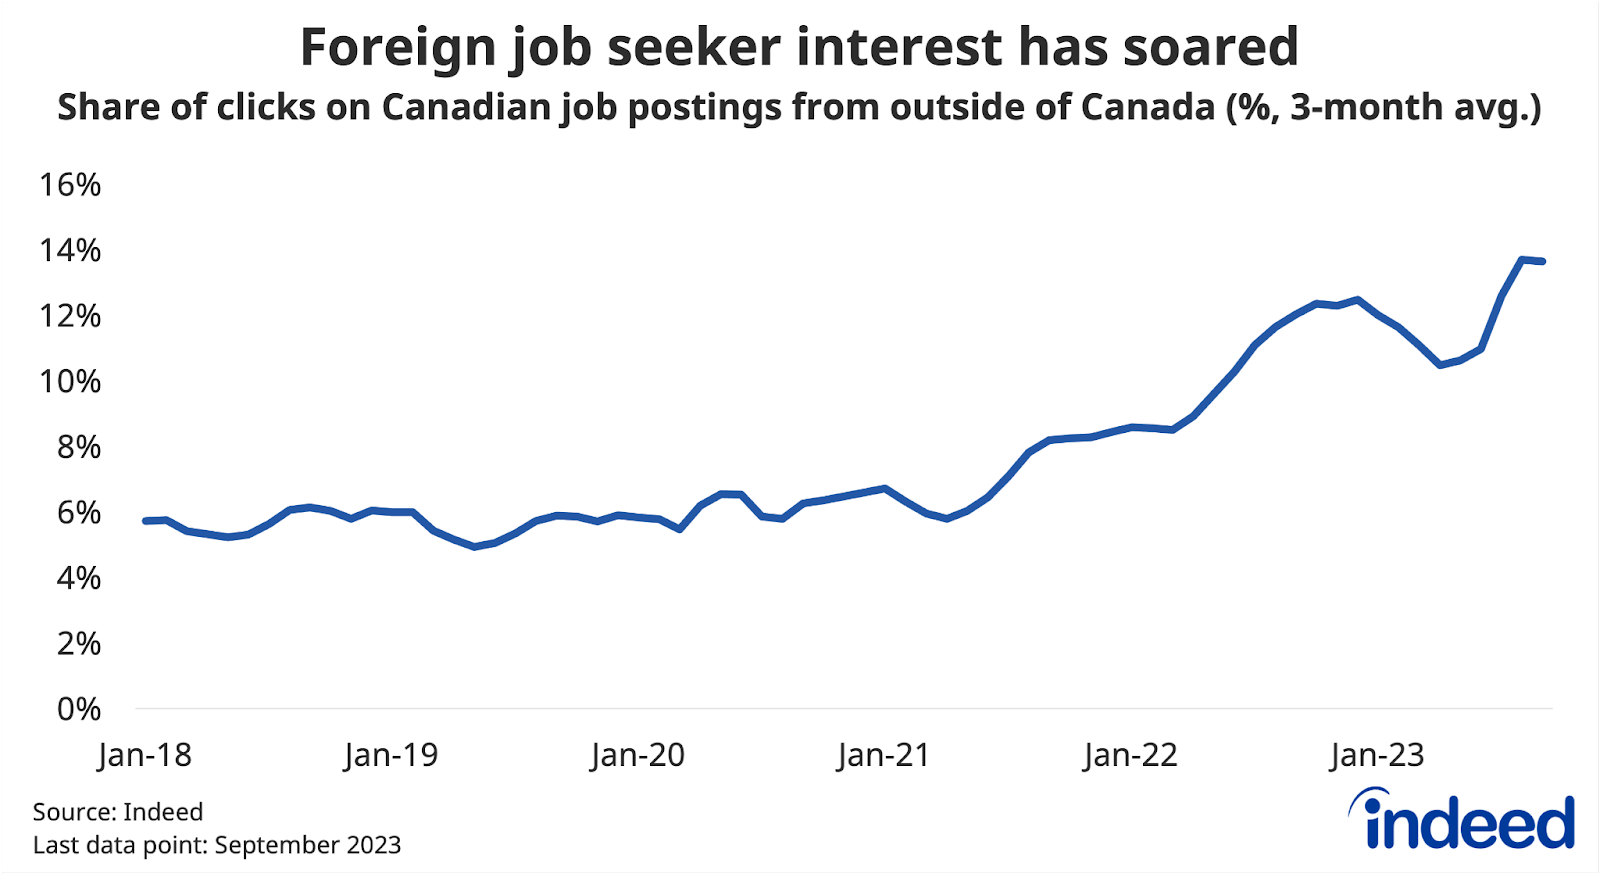 Line chart title “Foreign job seeker interest has soared” shows the three-month average of the share of clicks on Canadian job postings from job seekers located outside of Canada, between March 2018 and September 2023. The foreign click share in 2023Q3 stood at 14%, well above its 6% share four years prior.   